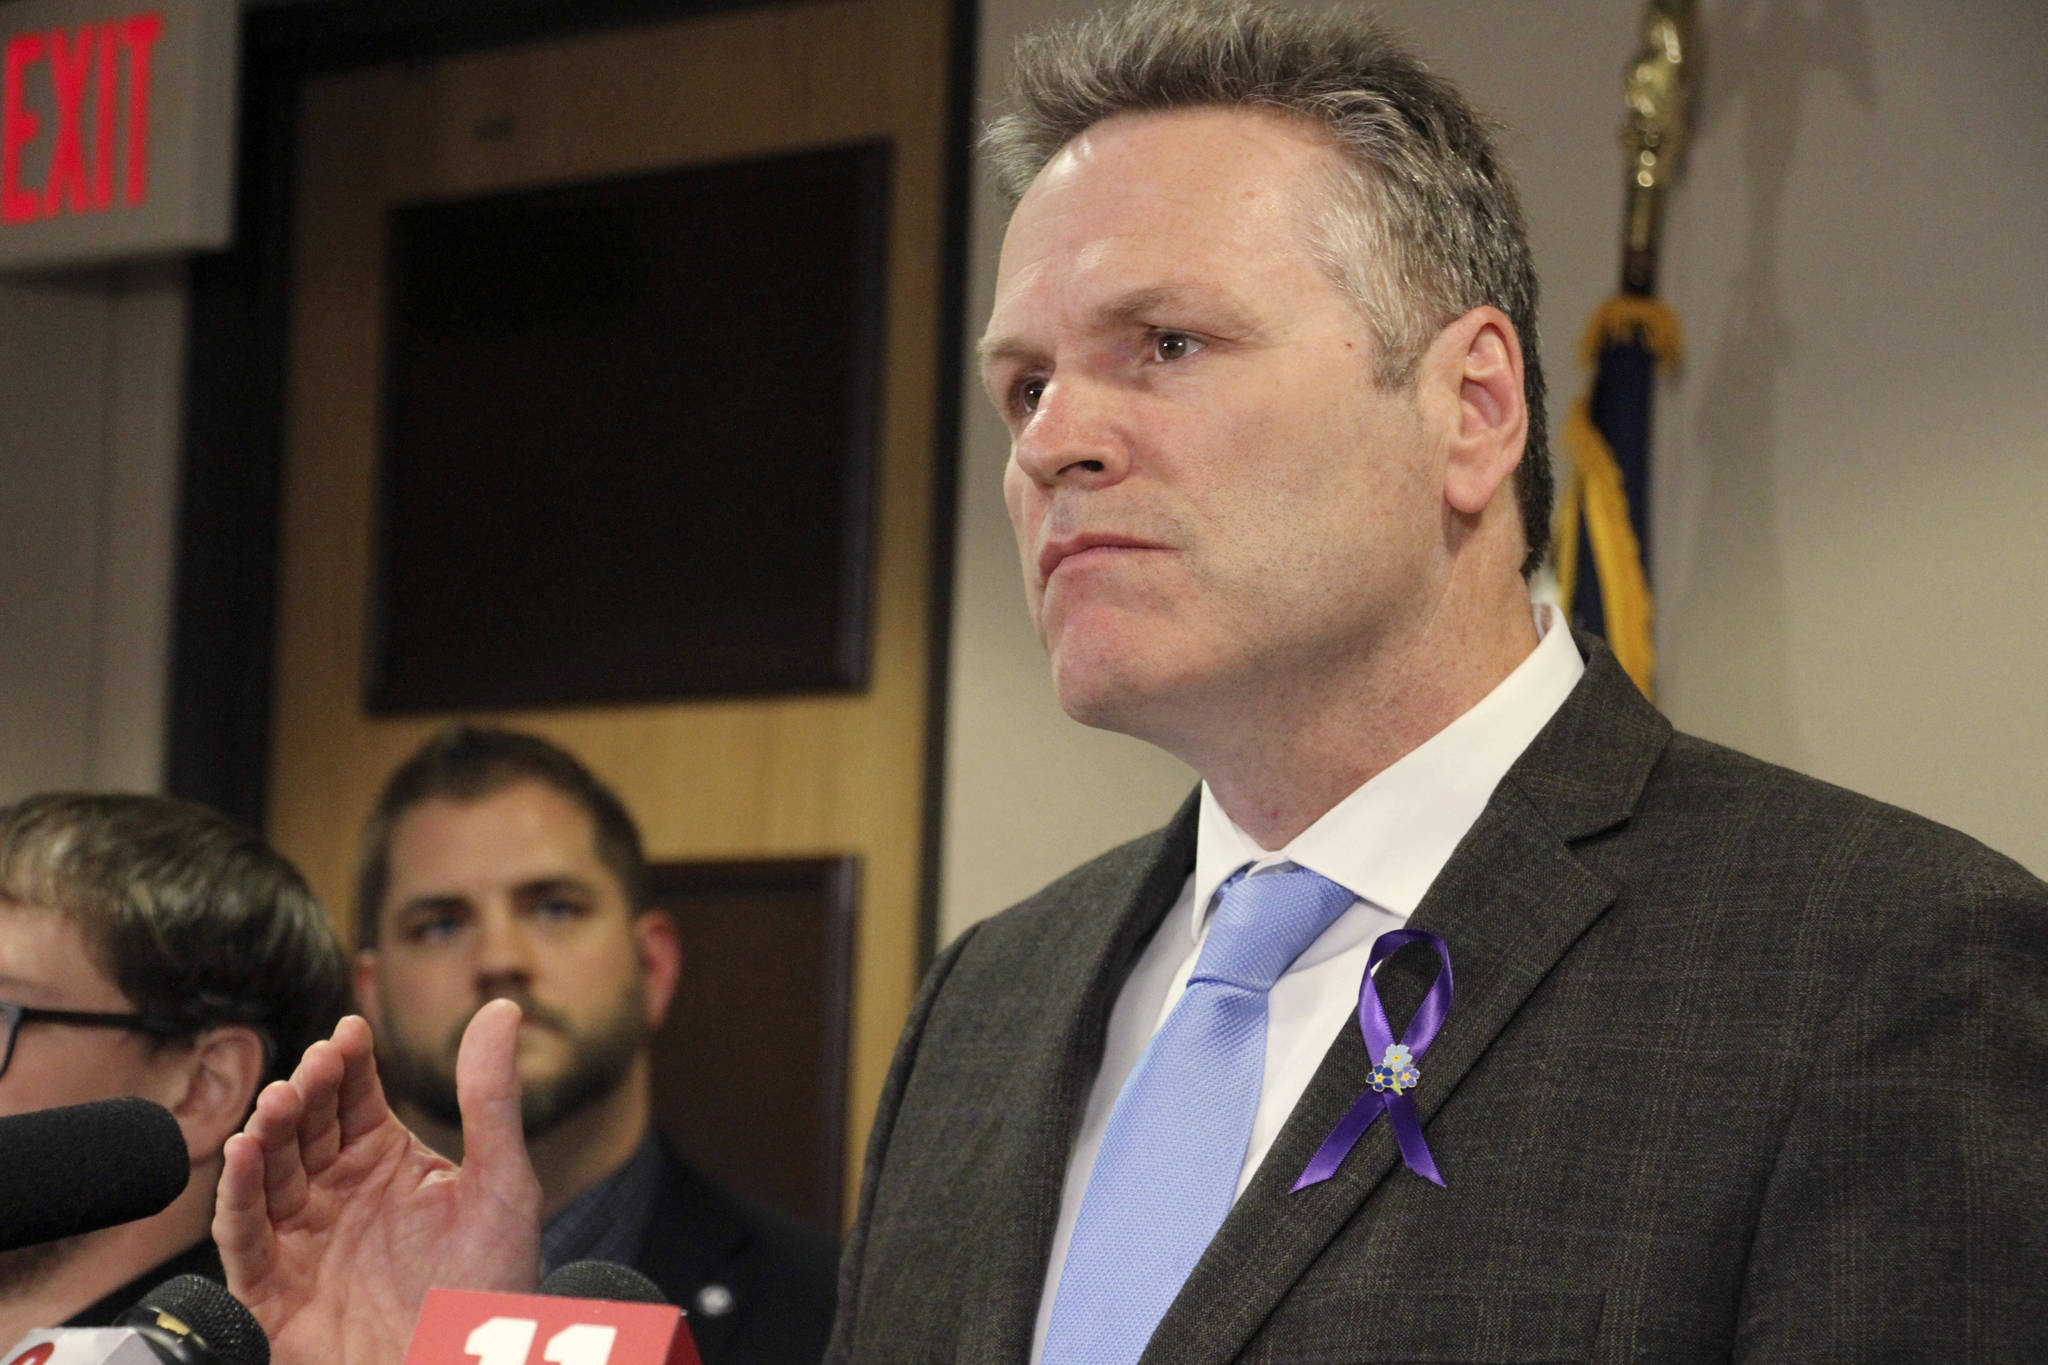 Gov. Mike Dunleavy speaks during a news conference in Anchorage in March. Dunleavy faces criticism for his handling of COVID-19, from those who think he's not doing enough to address rising case counts to those who think he's been overreaching. (AP Photo / Mark Thiessen)